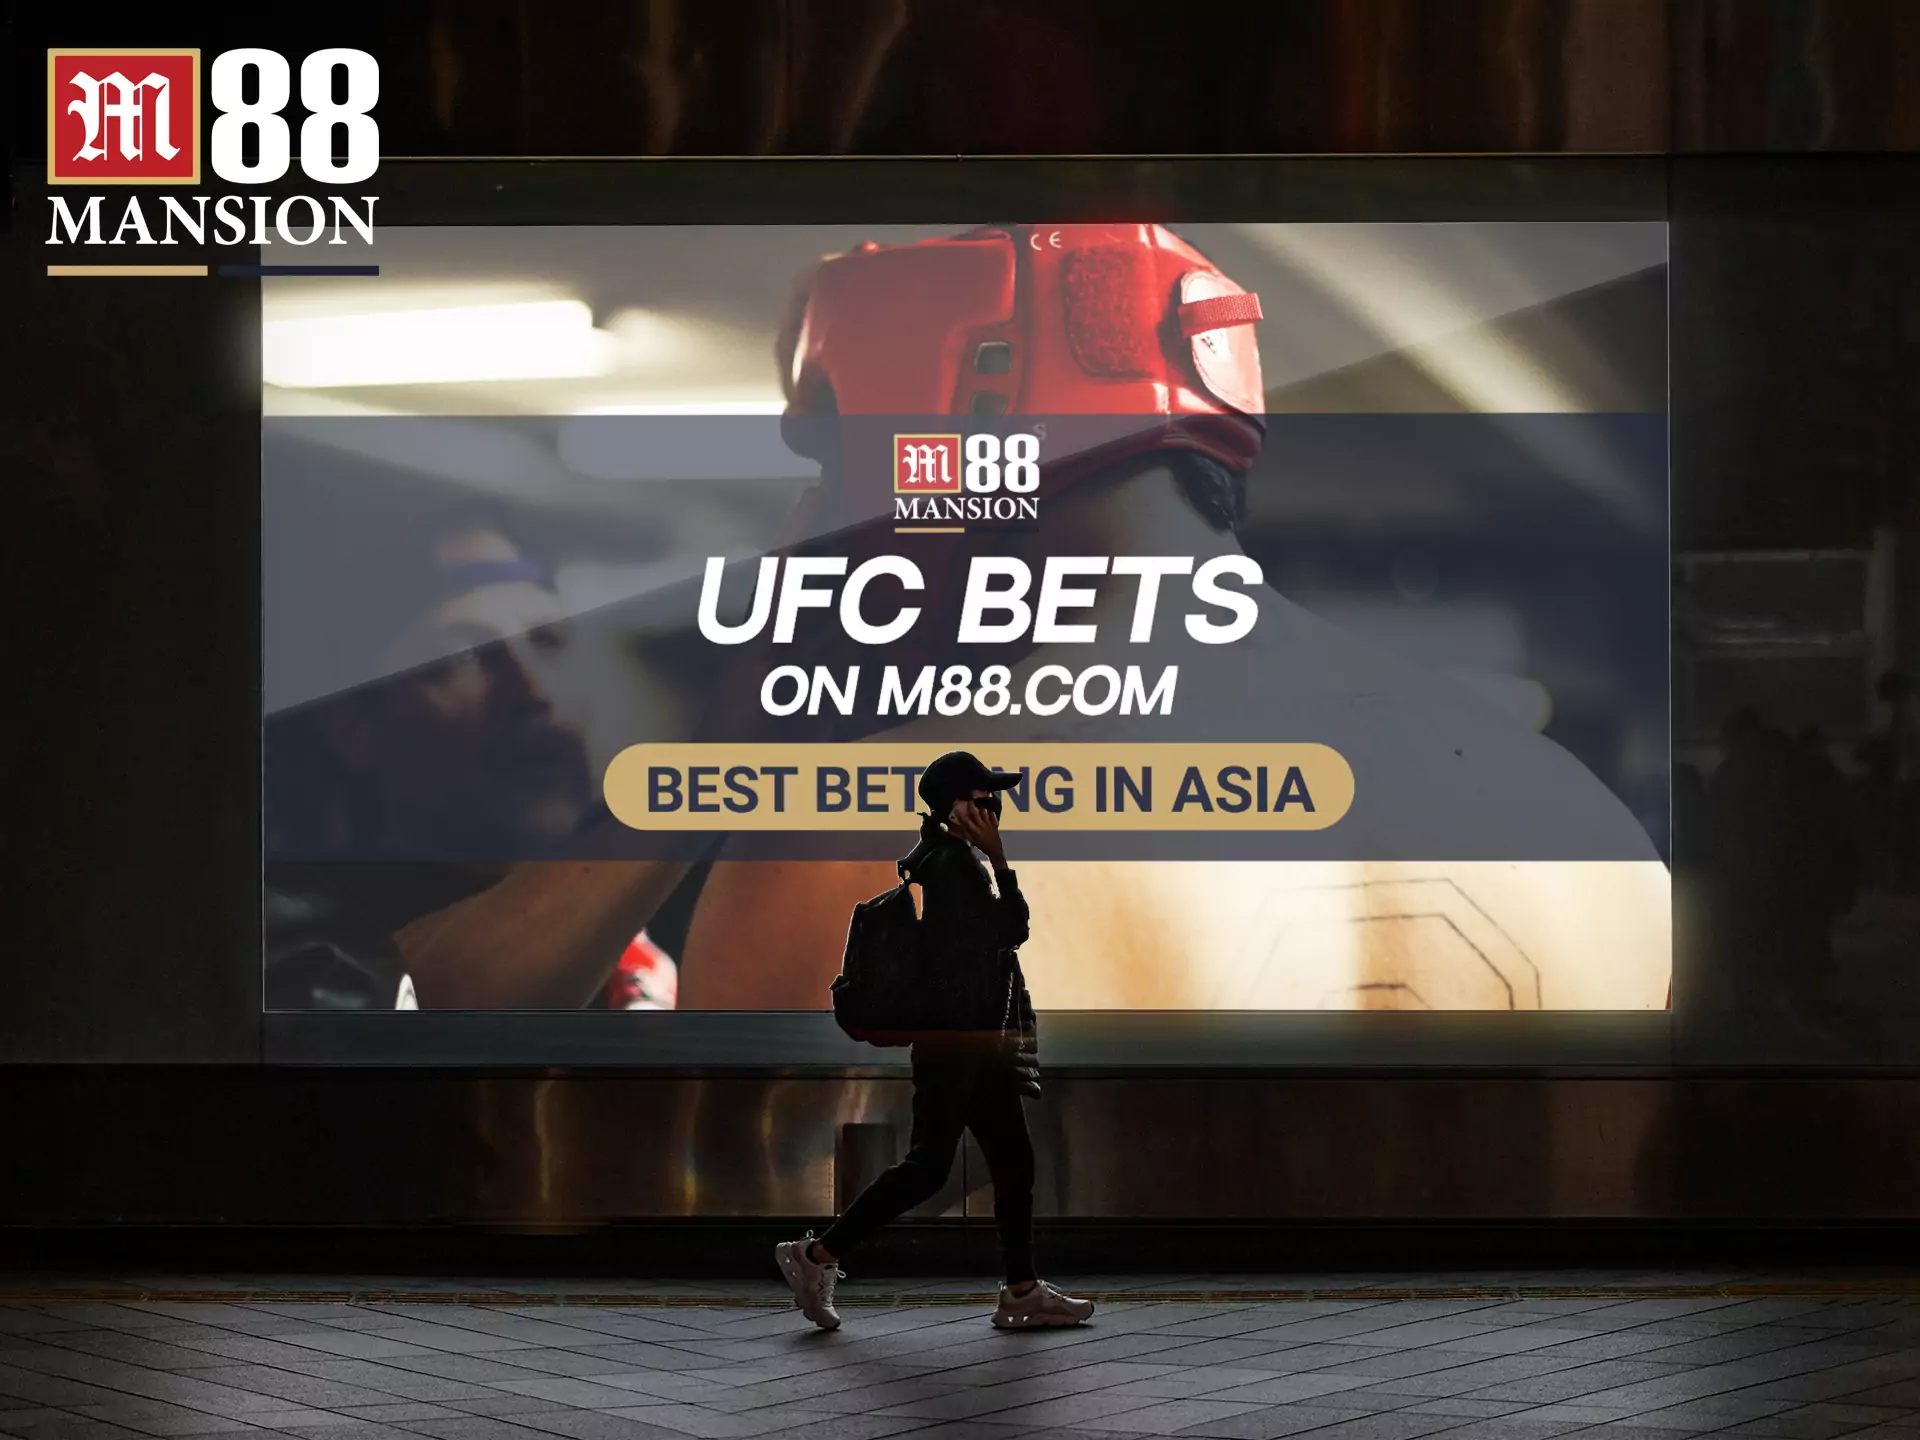 Besides classic boxing fights, users of M88 can bet on UFC.